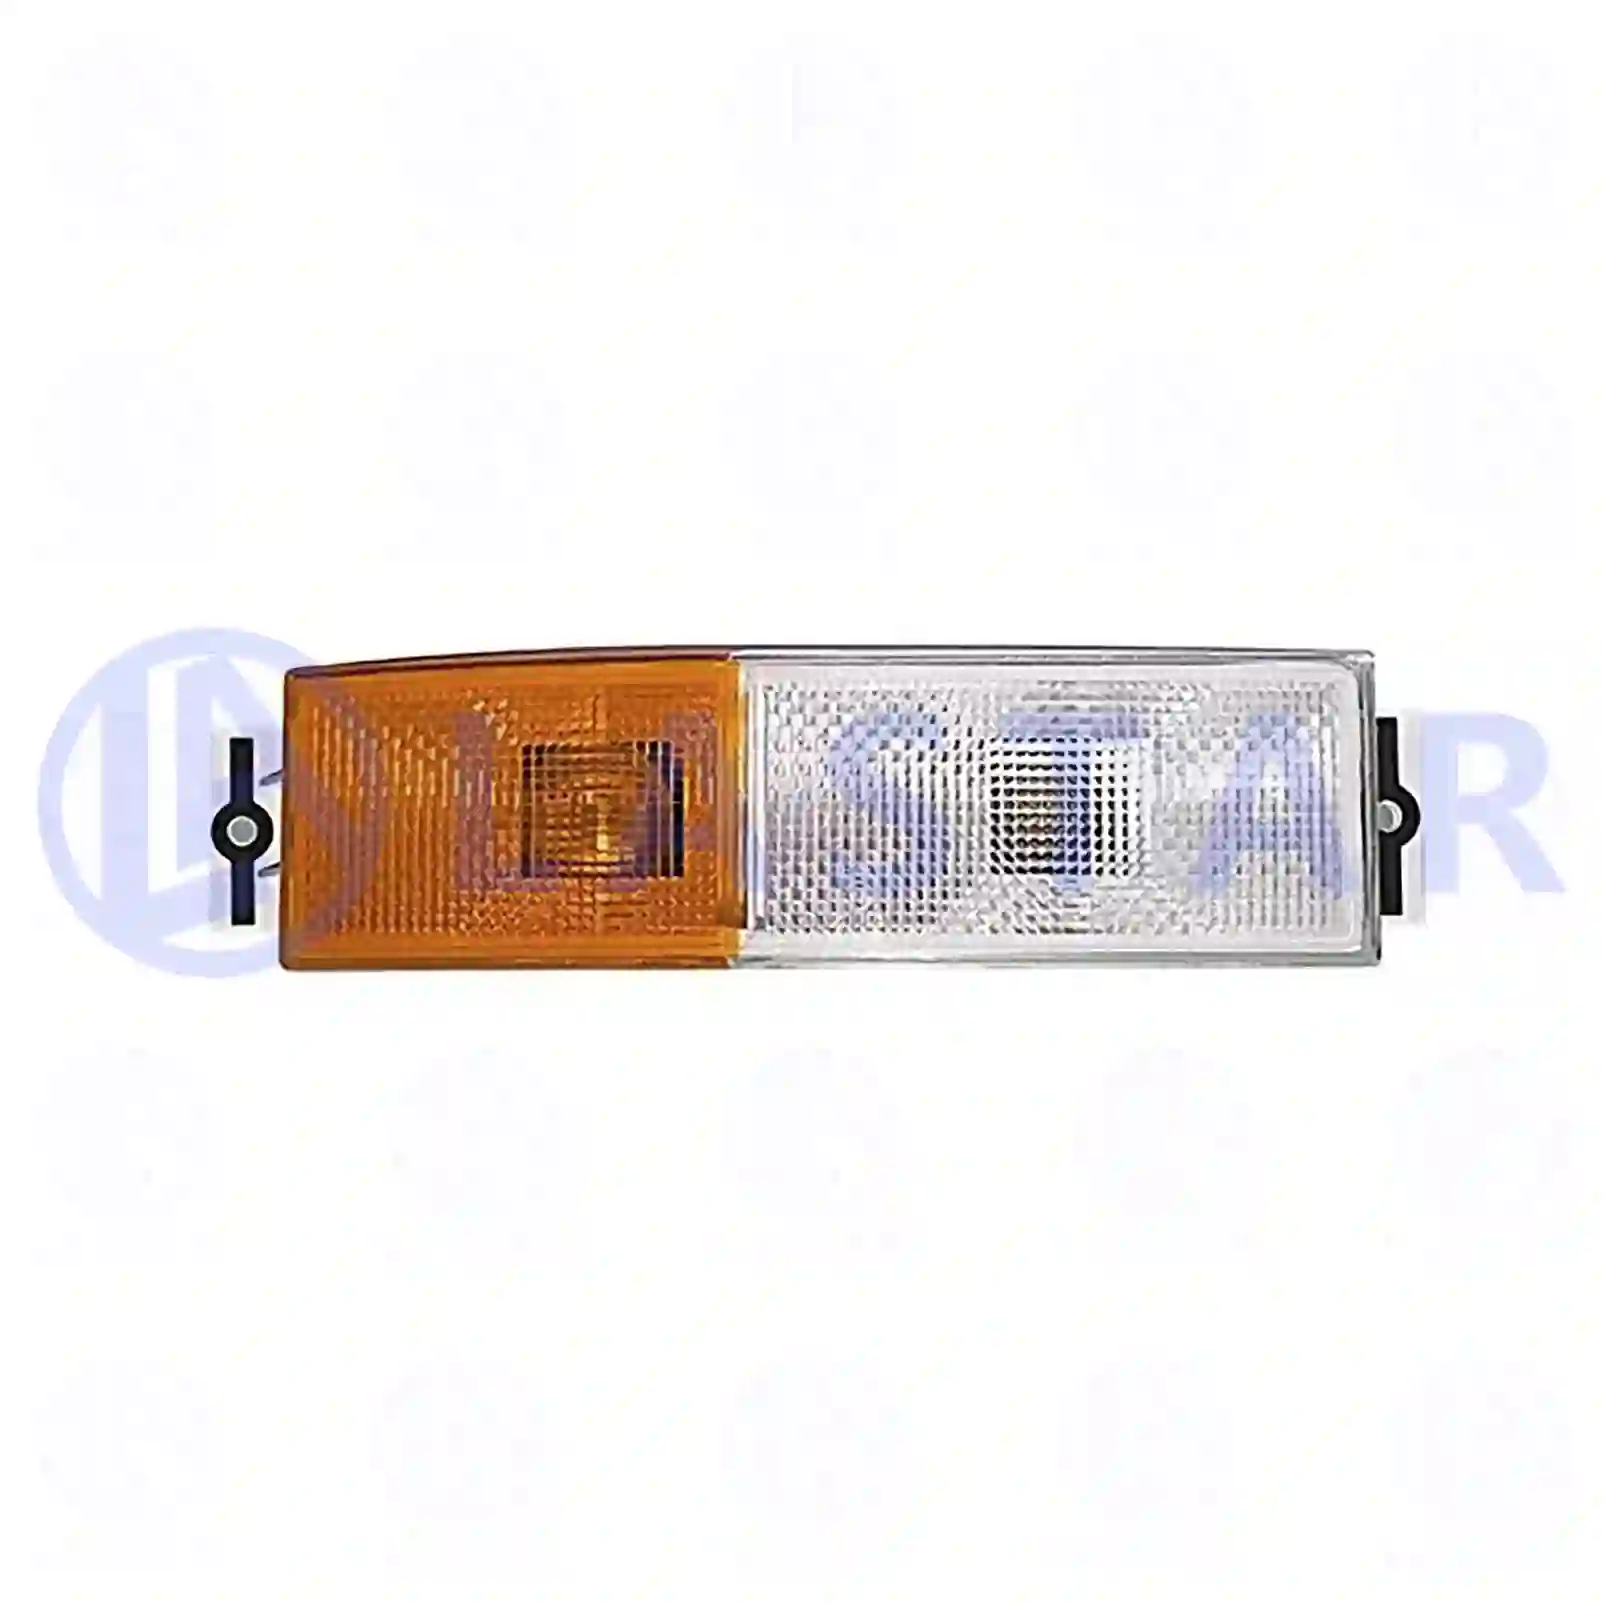 Turn signal lamp, with bulb, 77710127, 1304786, ZG21244-0008, ||  77710127 Lastar Spare Part | Truck Spare Parts, Auotomotive Spare Parts Turn signal lamp, with bulb, 77710127, 1304786, ZG21244-0008, ||  77710127 Lastar Spare Part | Truck Spare Parts, Auotomotive Spare Parts